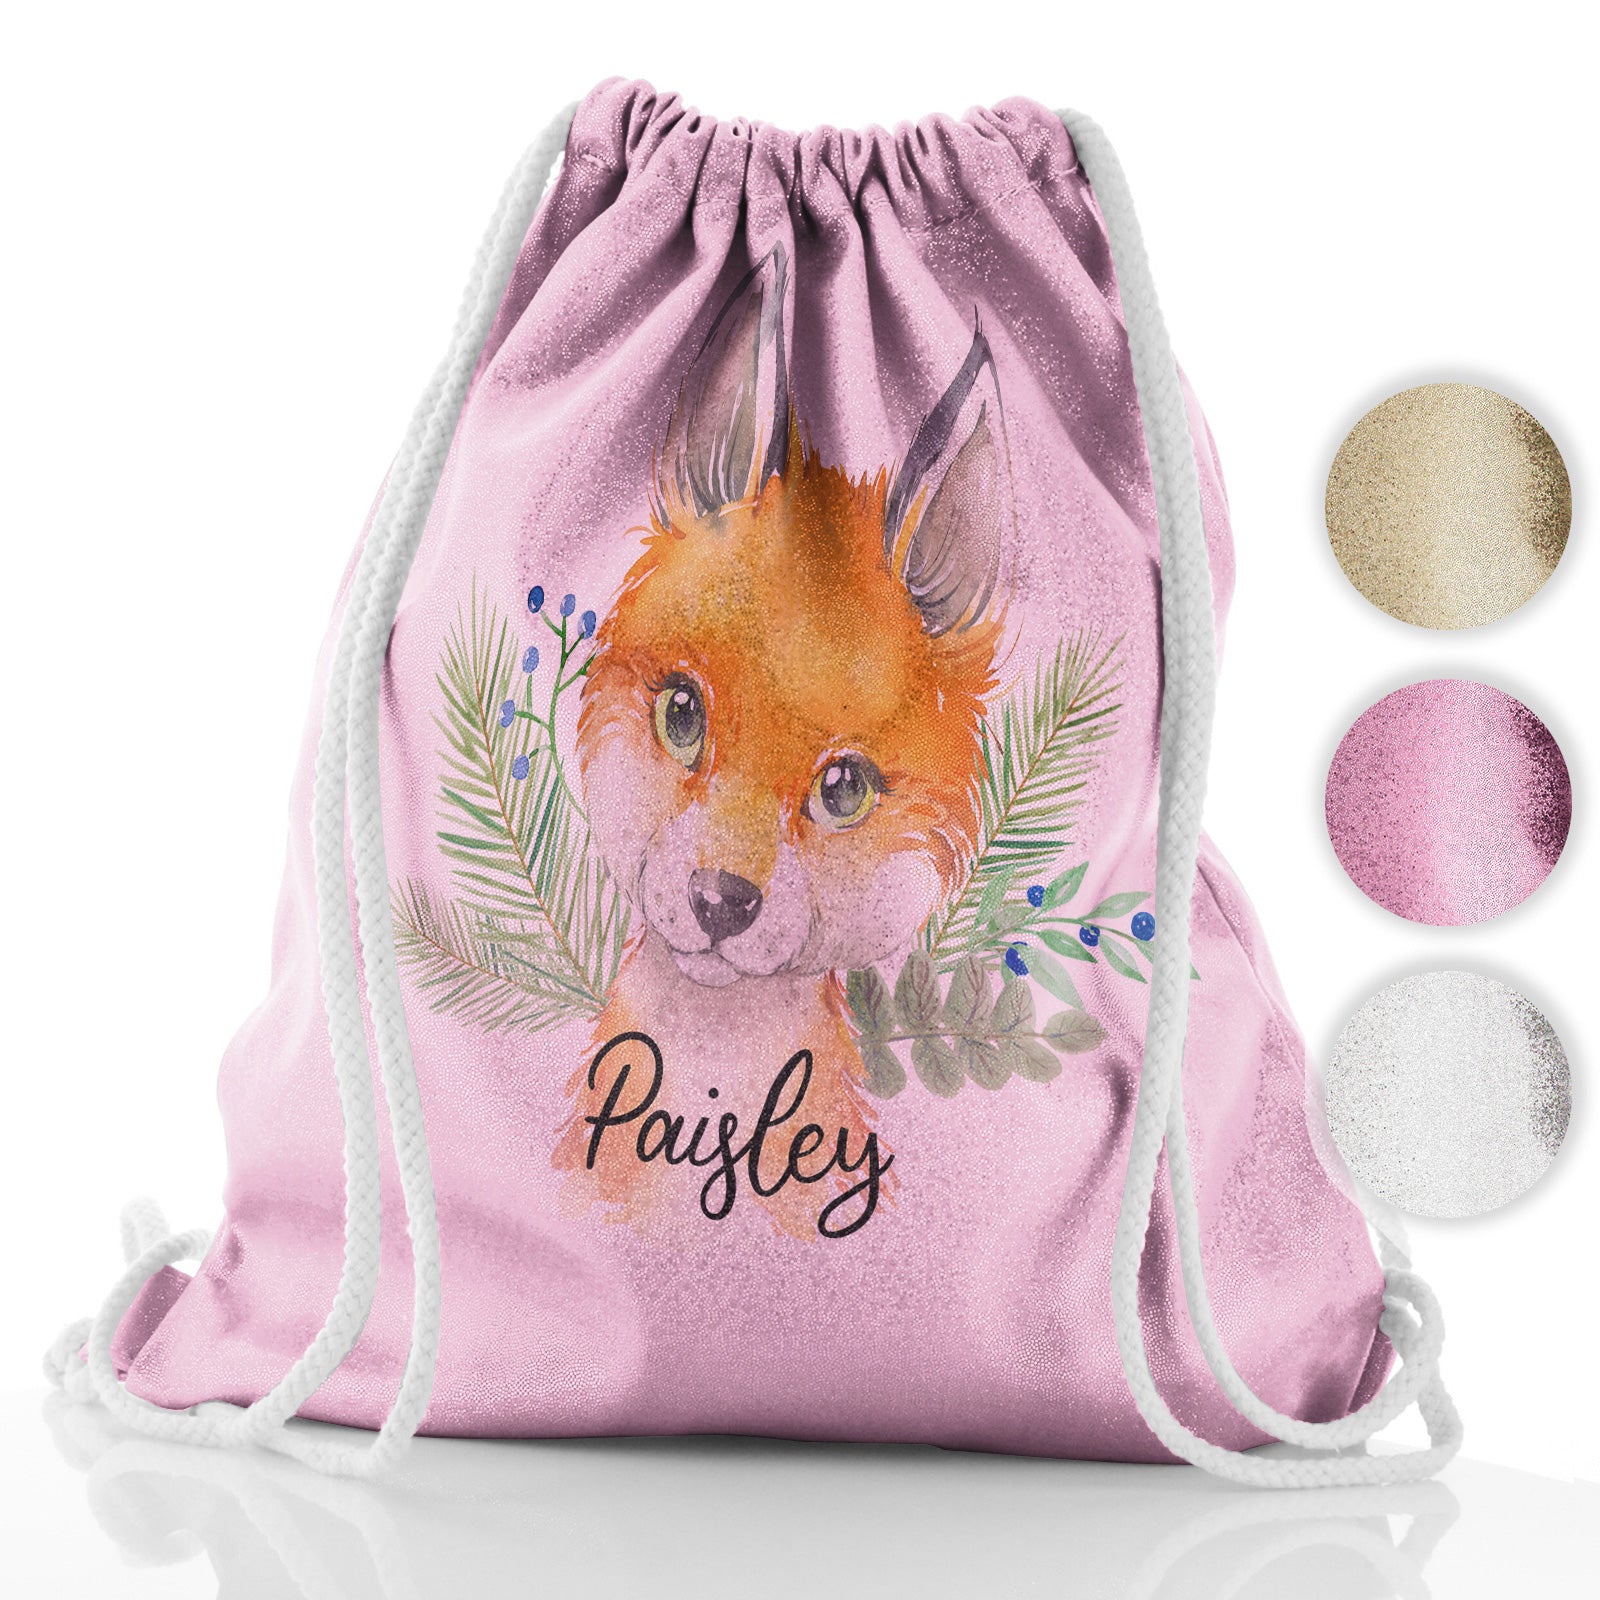 Personalised Glitter Drawstring Backpack with Red Fox Blue Berries and Cute Text